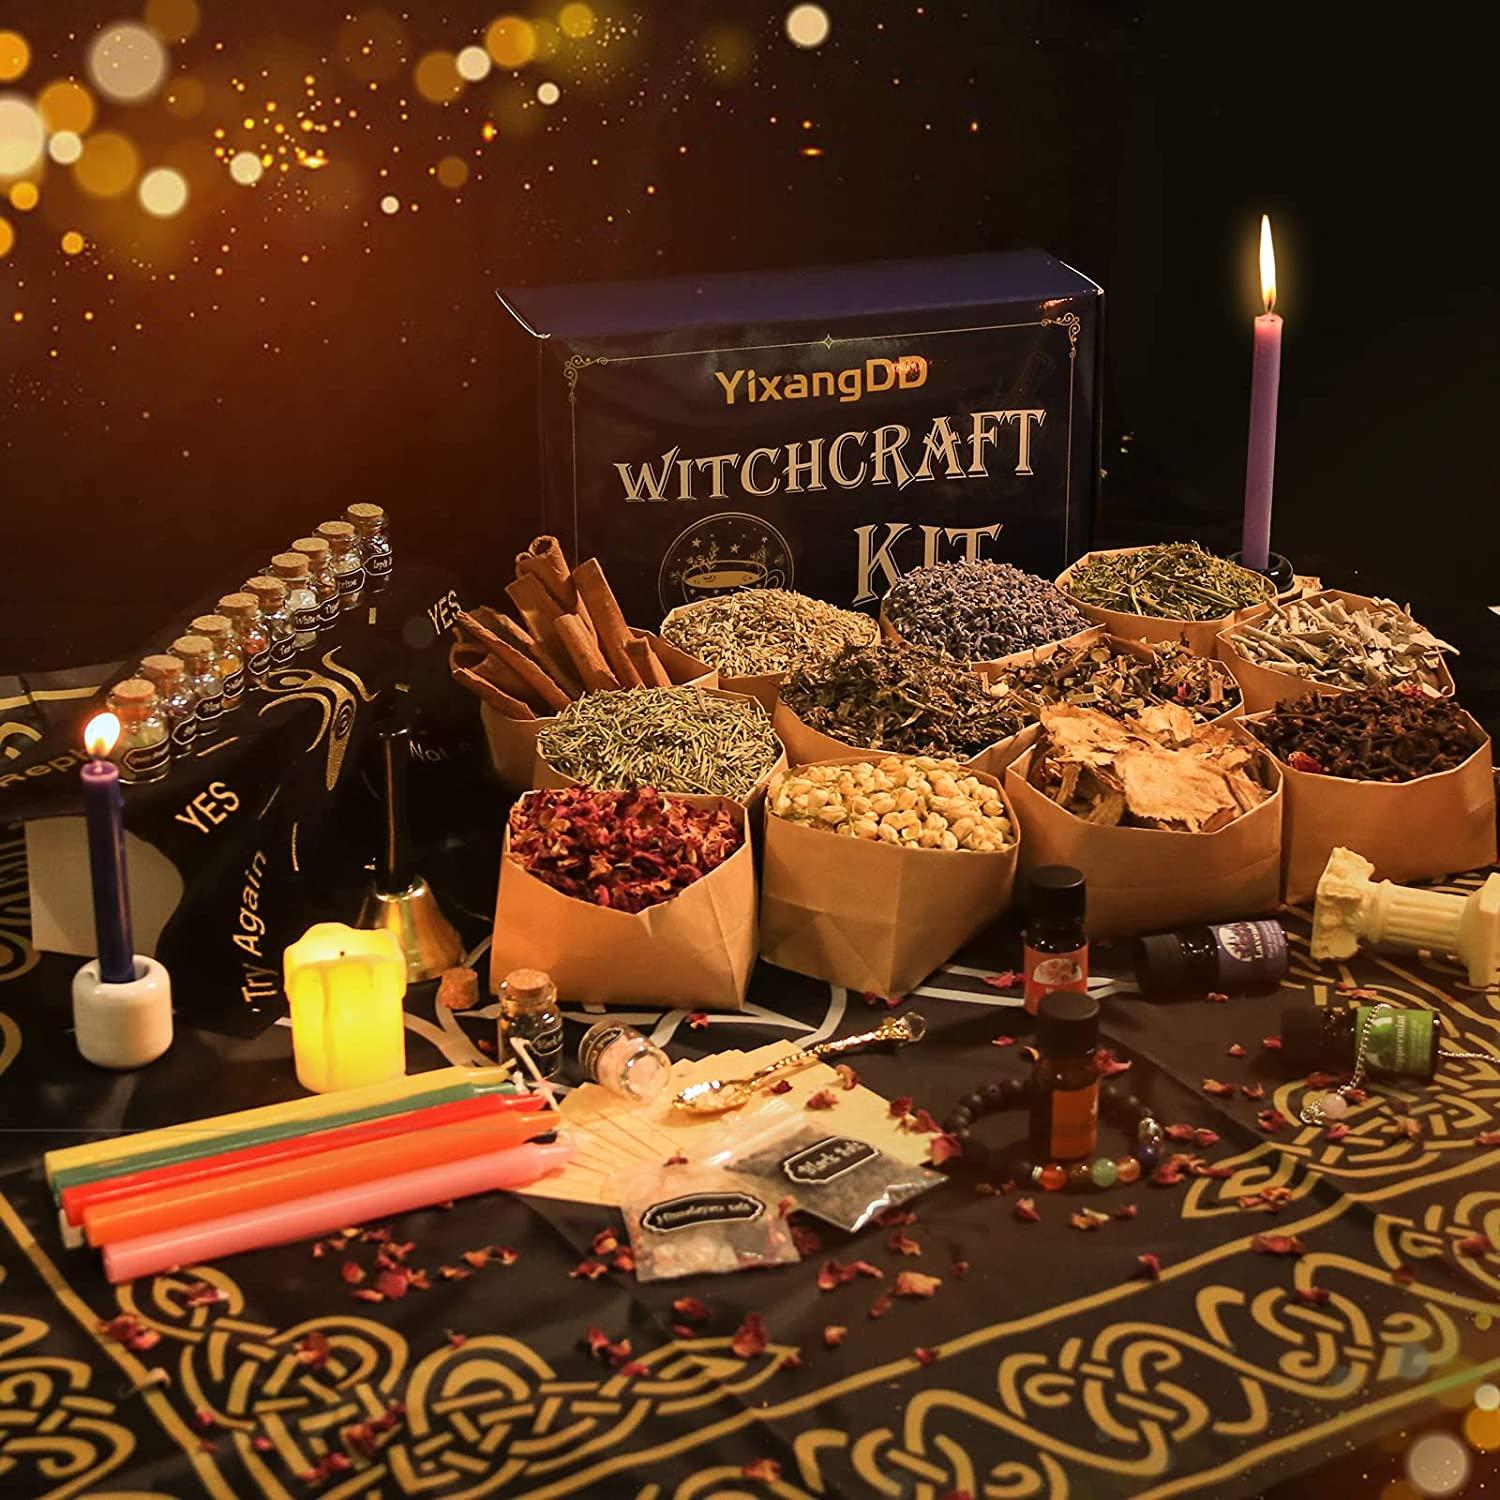 Witchcraft Supplies kit 60PCS -Witch Stuff Spell Kit - Witchcraft Supply  kit with Spell Candles ,Witchcraft Herbs , Crystal  Pendulums,Parchments,Mini Crystal Balls - Witch Starter Kit 60 Packs  Witchcraft Supplies